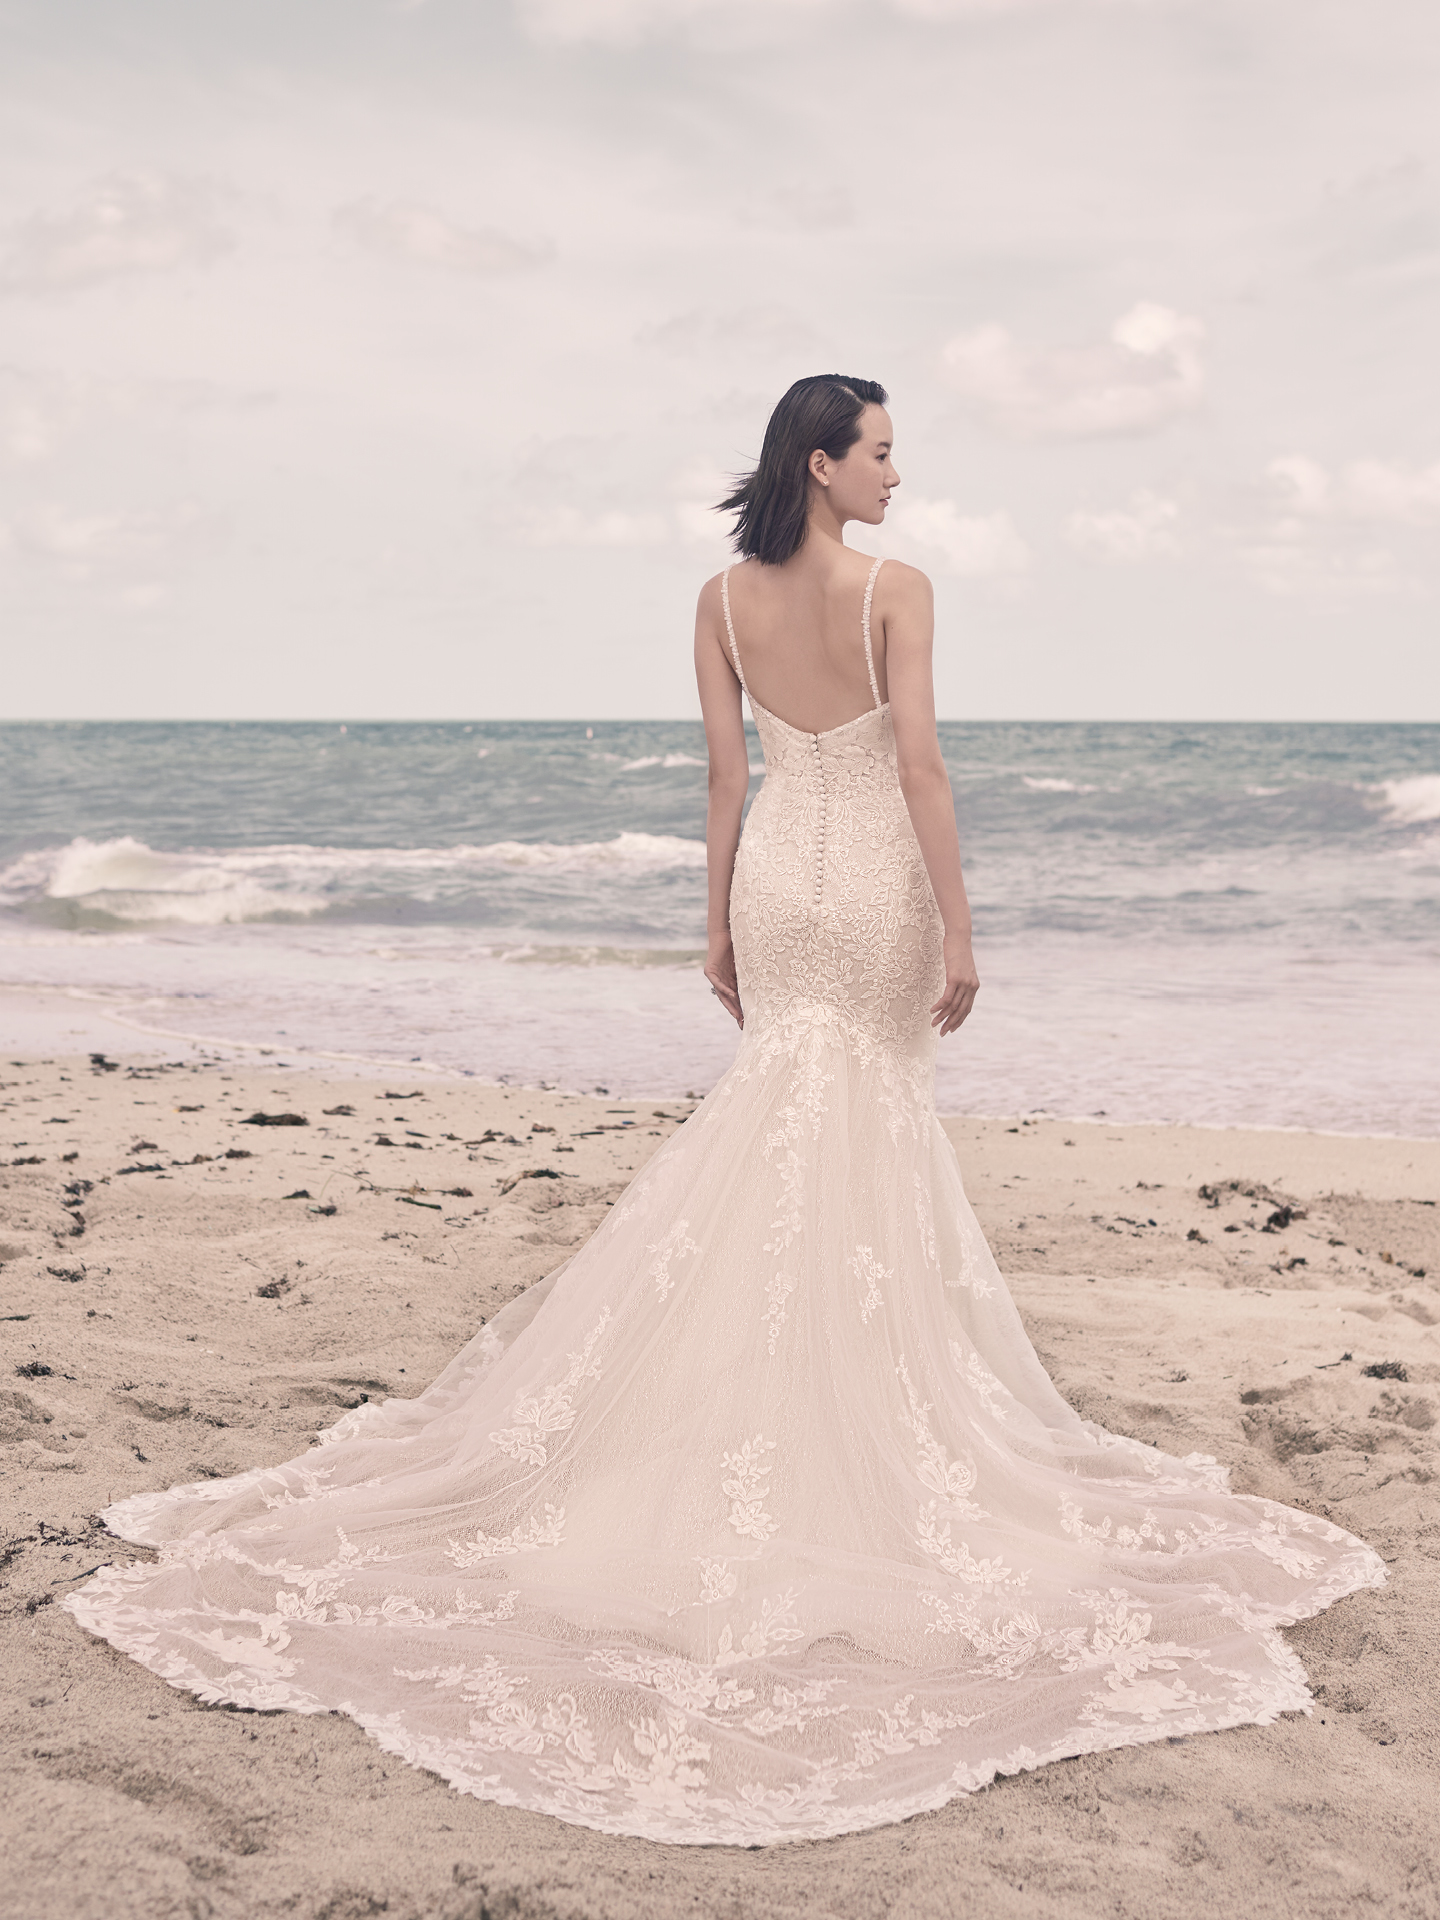 Model on Beach Wearing Lace Mermaid Wedding Dress with Long Train Called Bryan by Sottero and Midgley